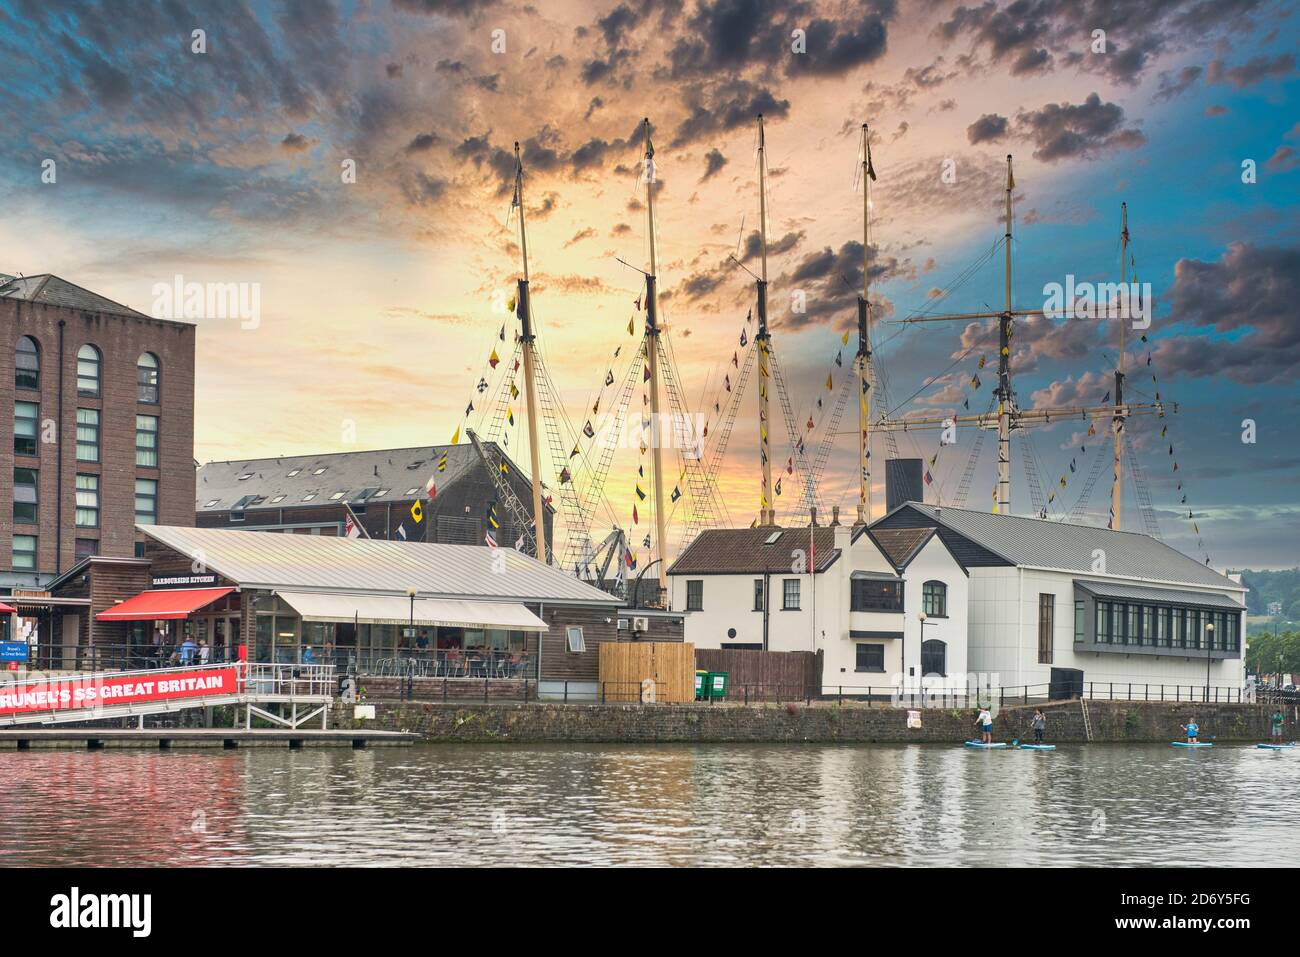 Rigging of Brunel's SS Great Britain, world's first iron passenger liner. Backlit by sunset. Being Brunel Museum, Dockyard Cafe. Harbourside Kitchen. Stock Photo